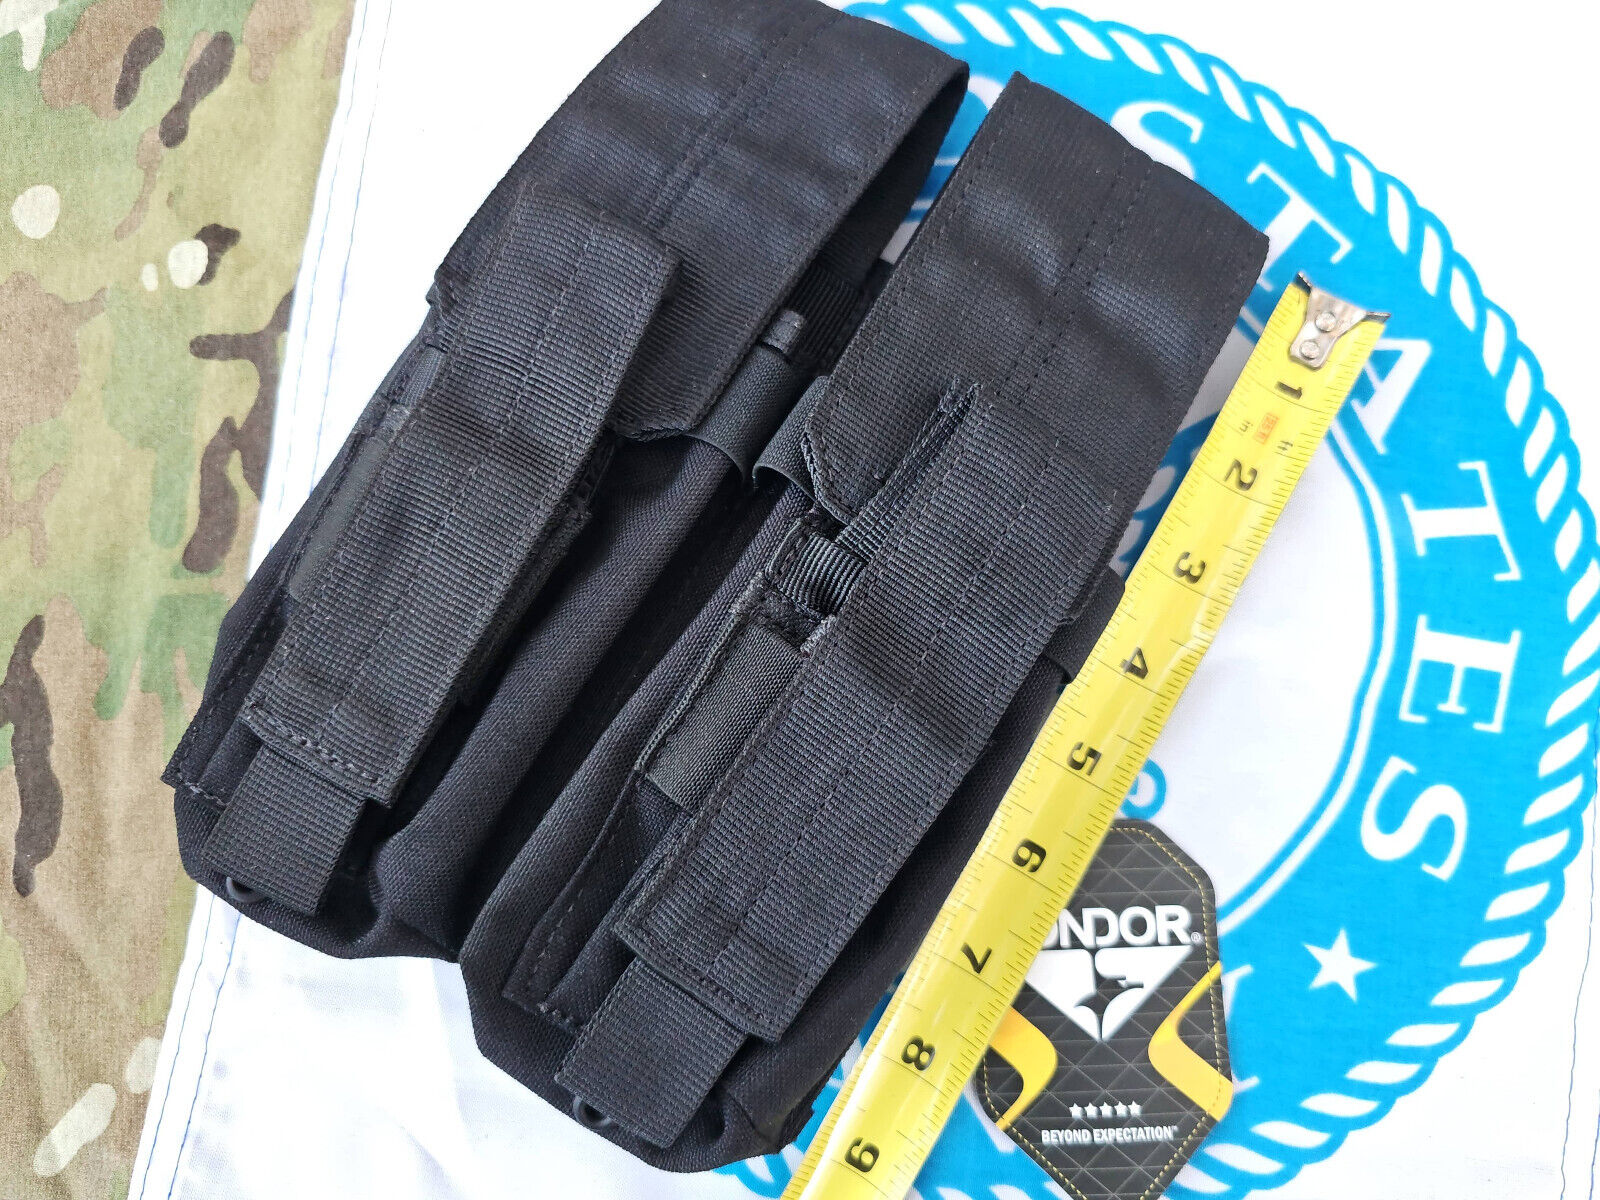 New Condor MA71 MOLLE Black Double Magazine Plate Carrier Pouch V1.0